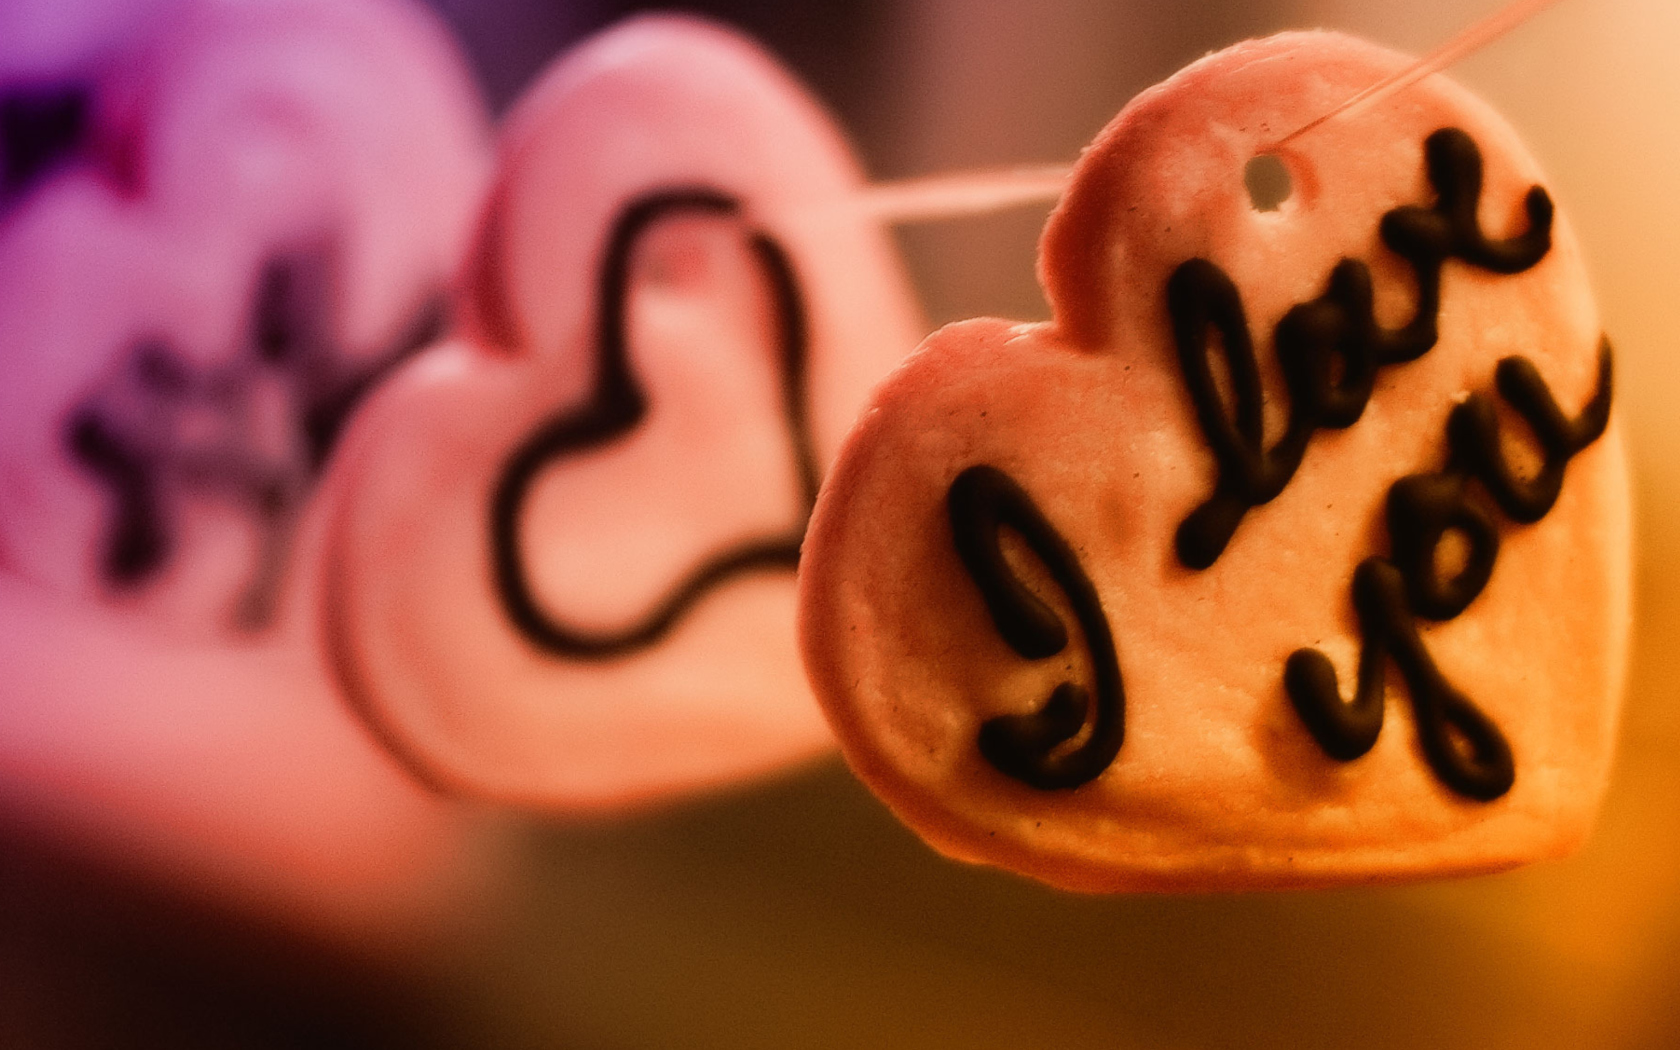 I Love You Cookie wallpaper 1680x1050